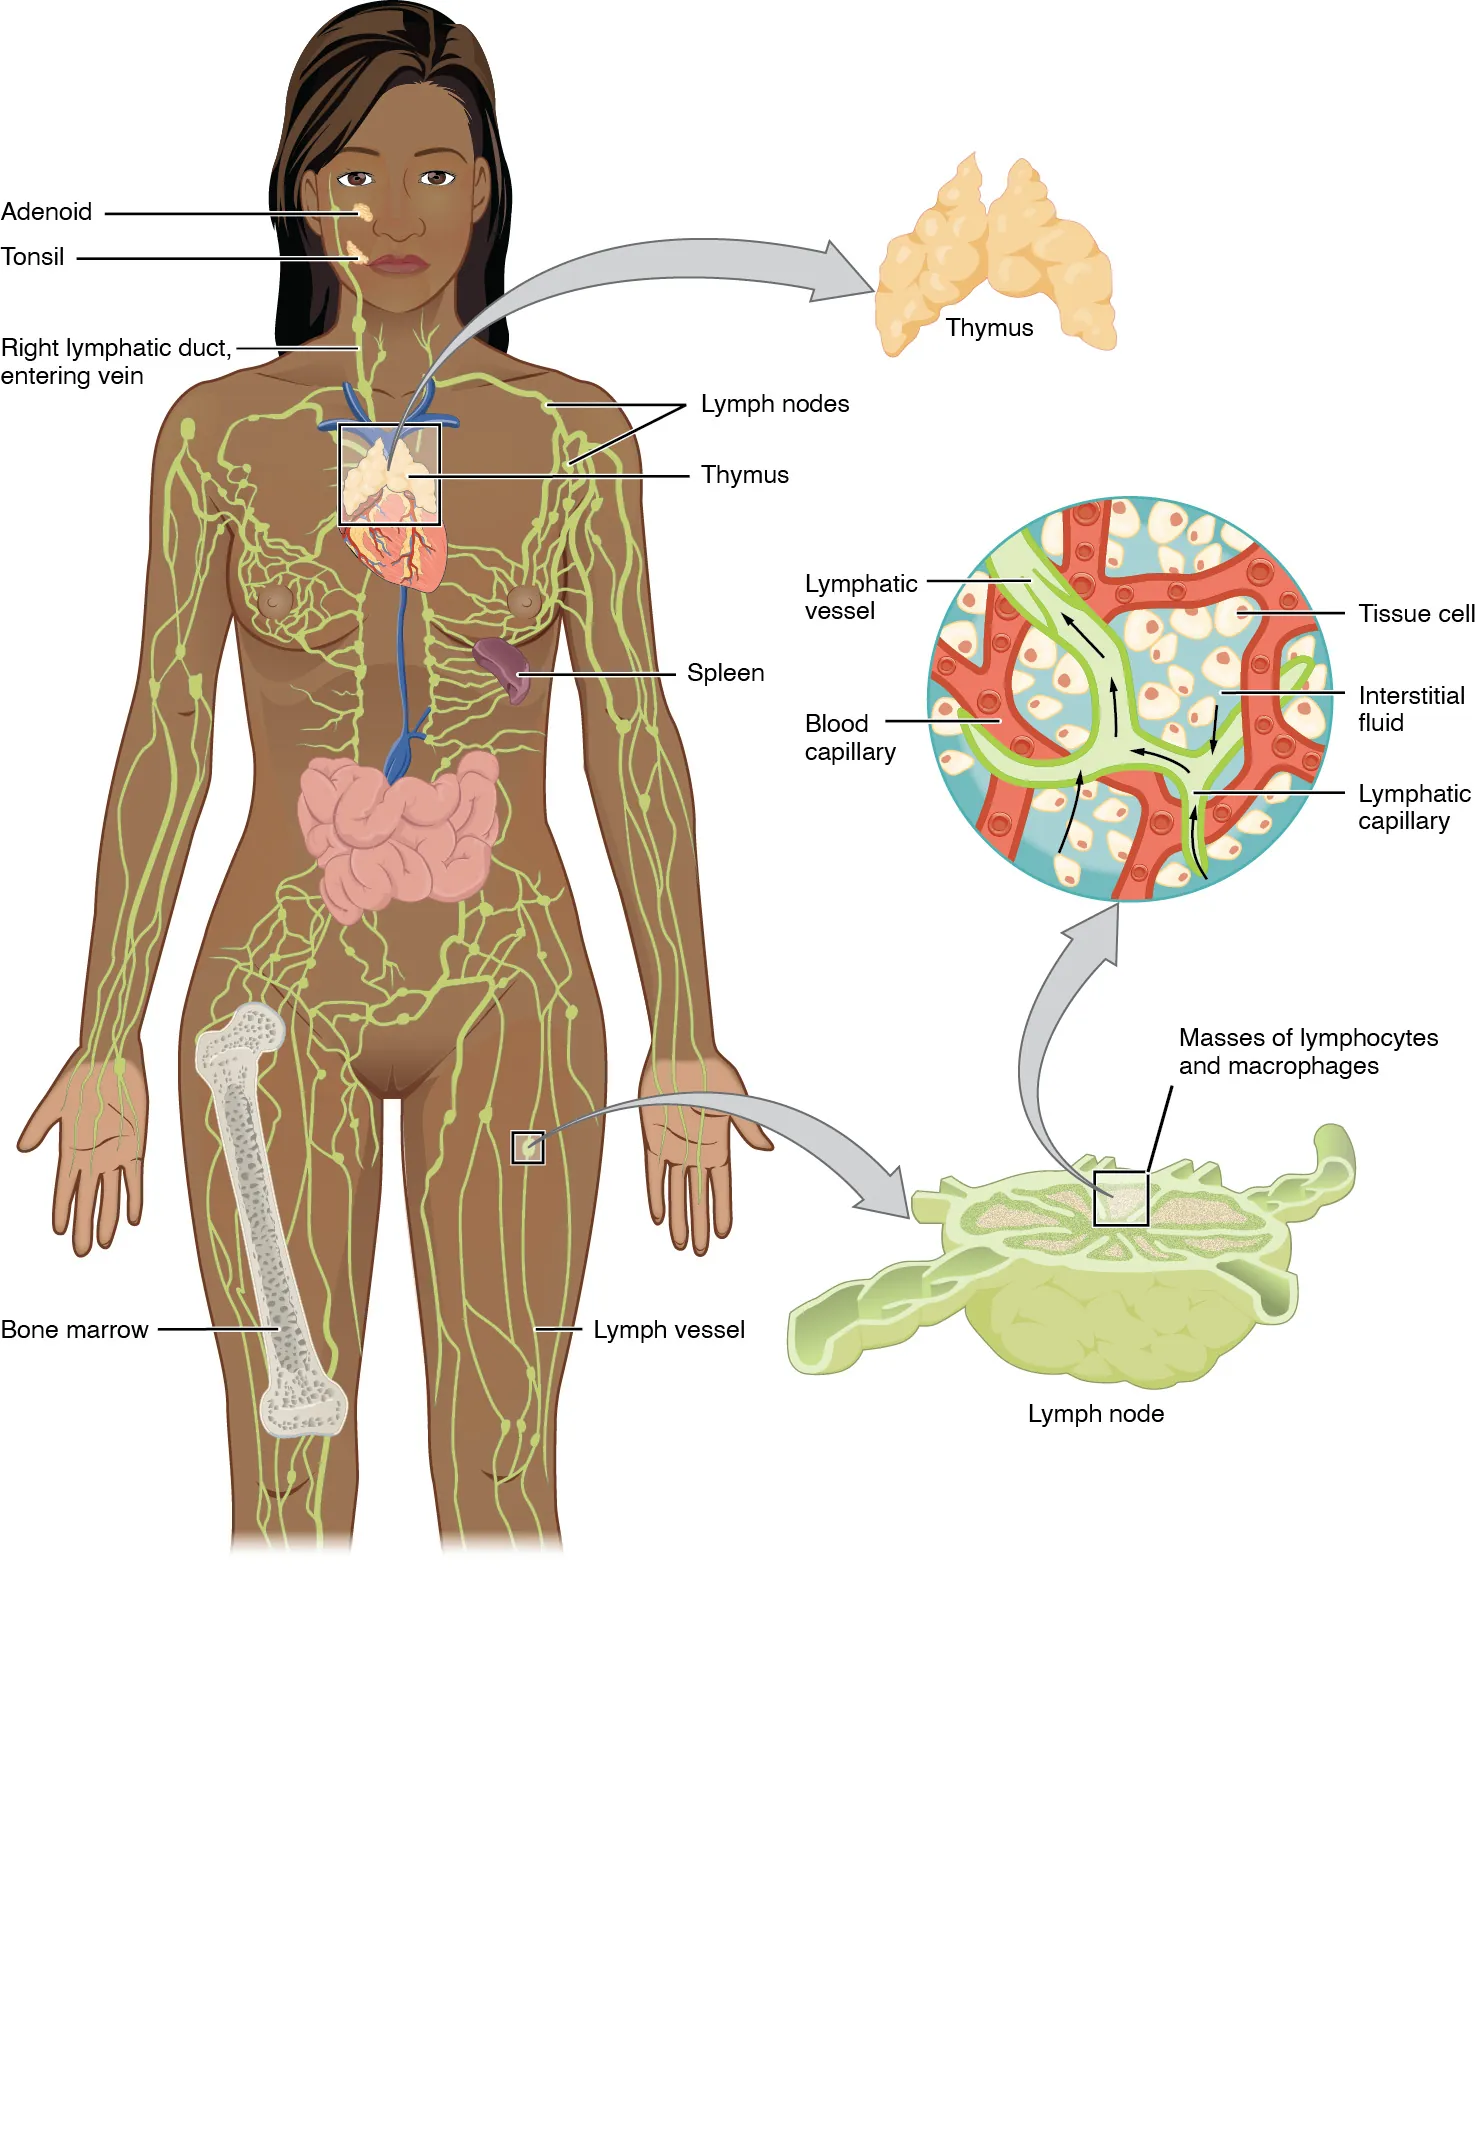 The left panel shows a female human body, and the entire lymphatic system is shown. The right panel shows magnified images of the thymus and the lymph node. All the major parts in the lymphatic system are labeled.